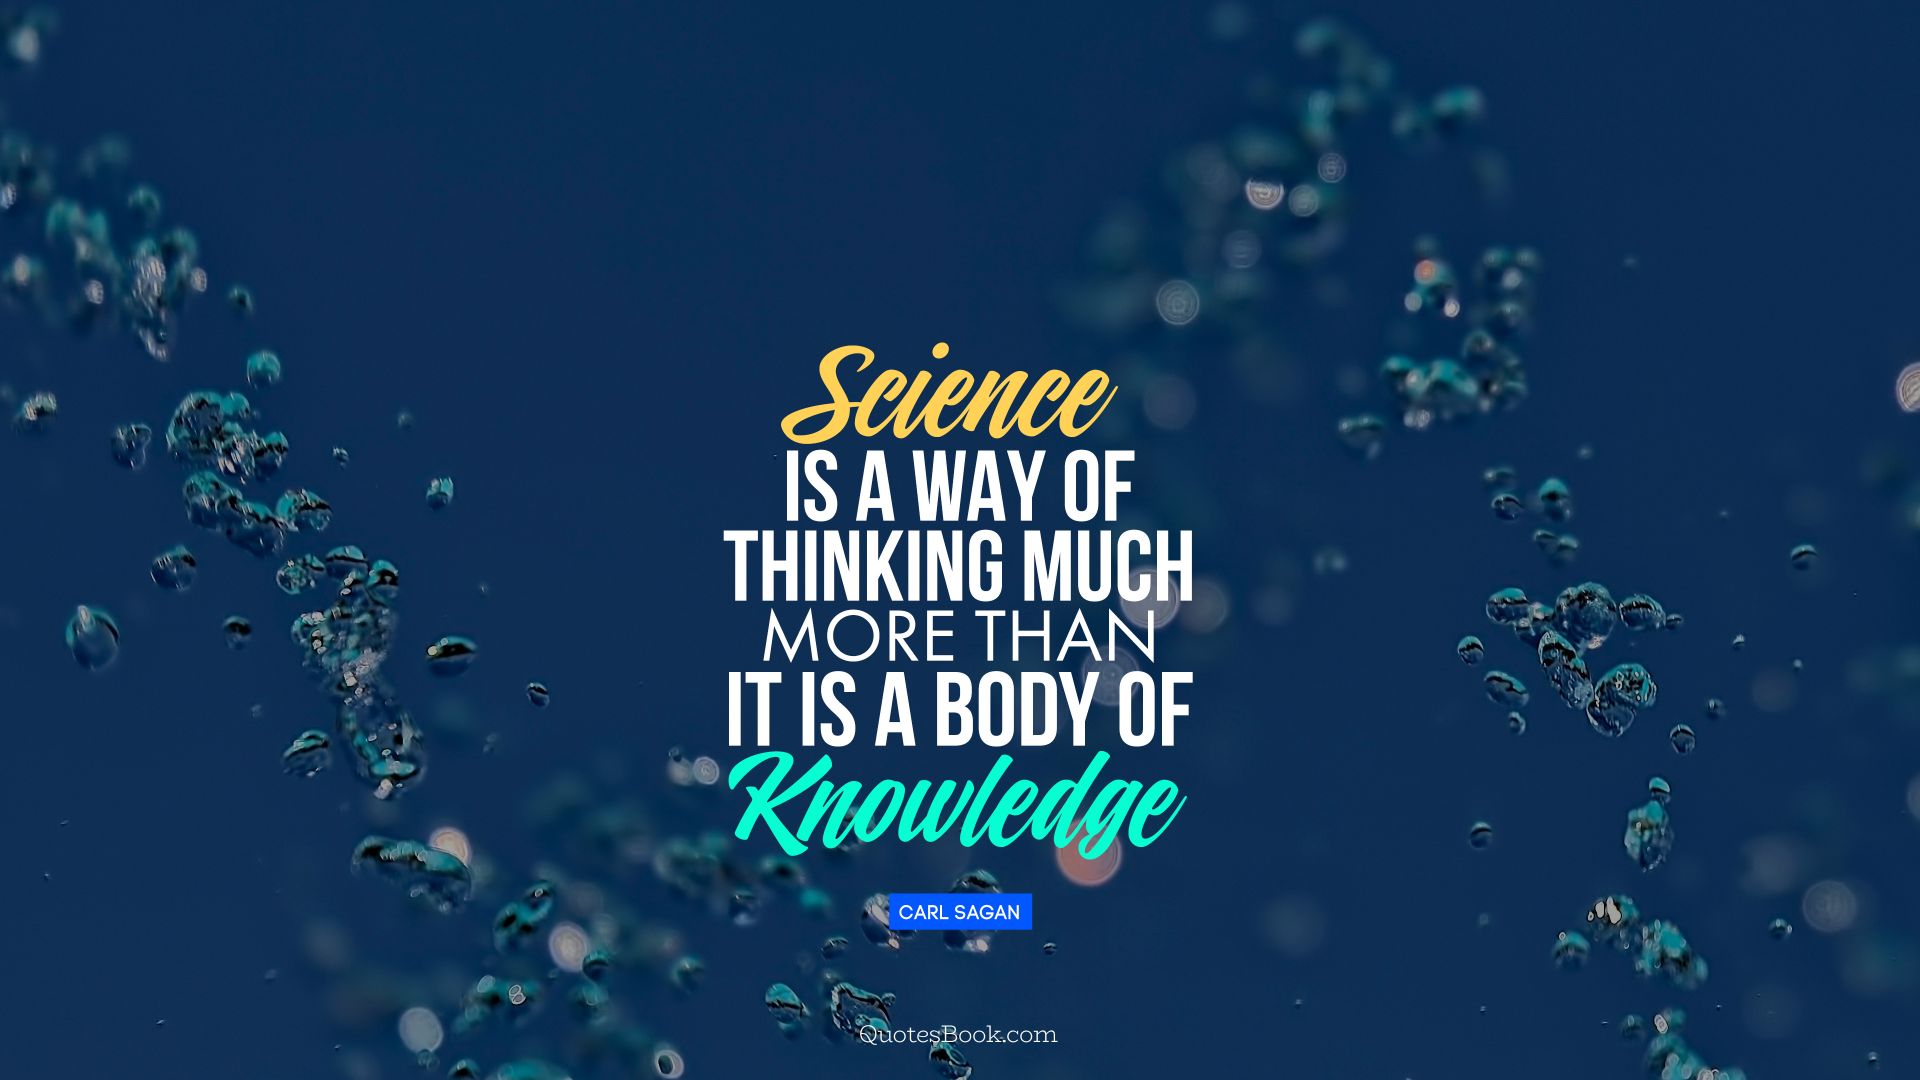 Science is a way of thinking much more than it is a body of knowledge. - Quote by Carl Sagan